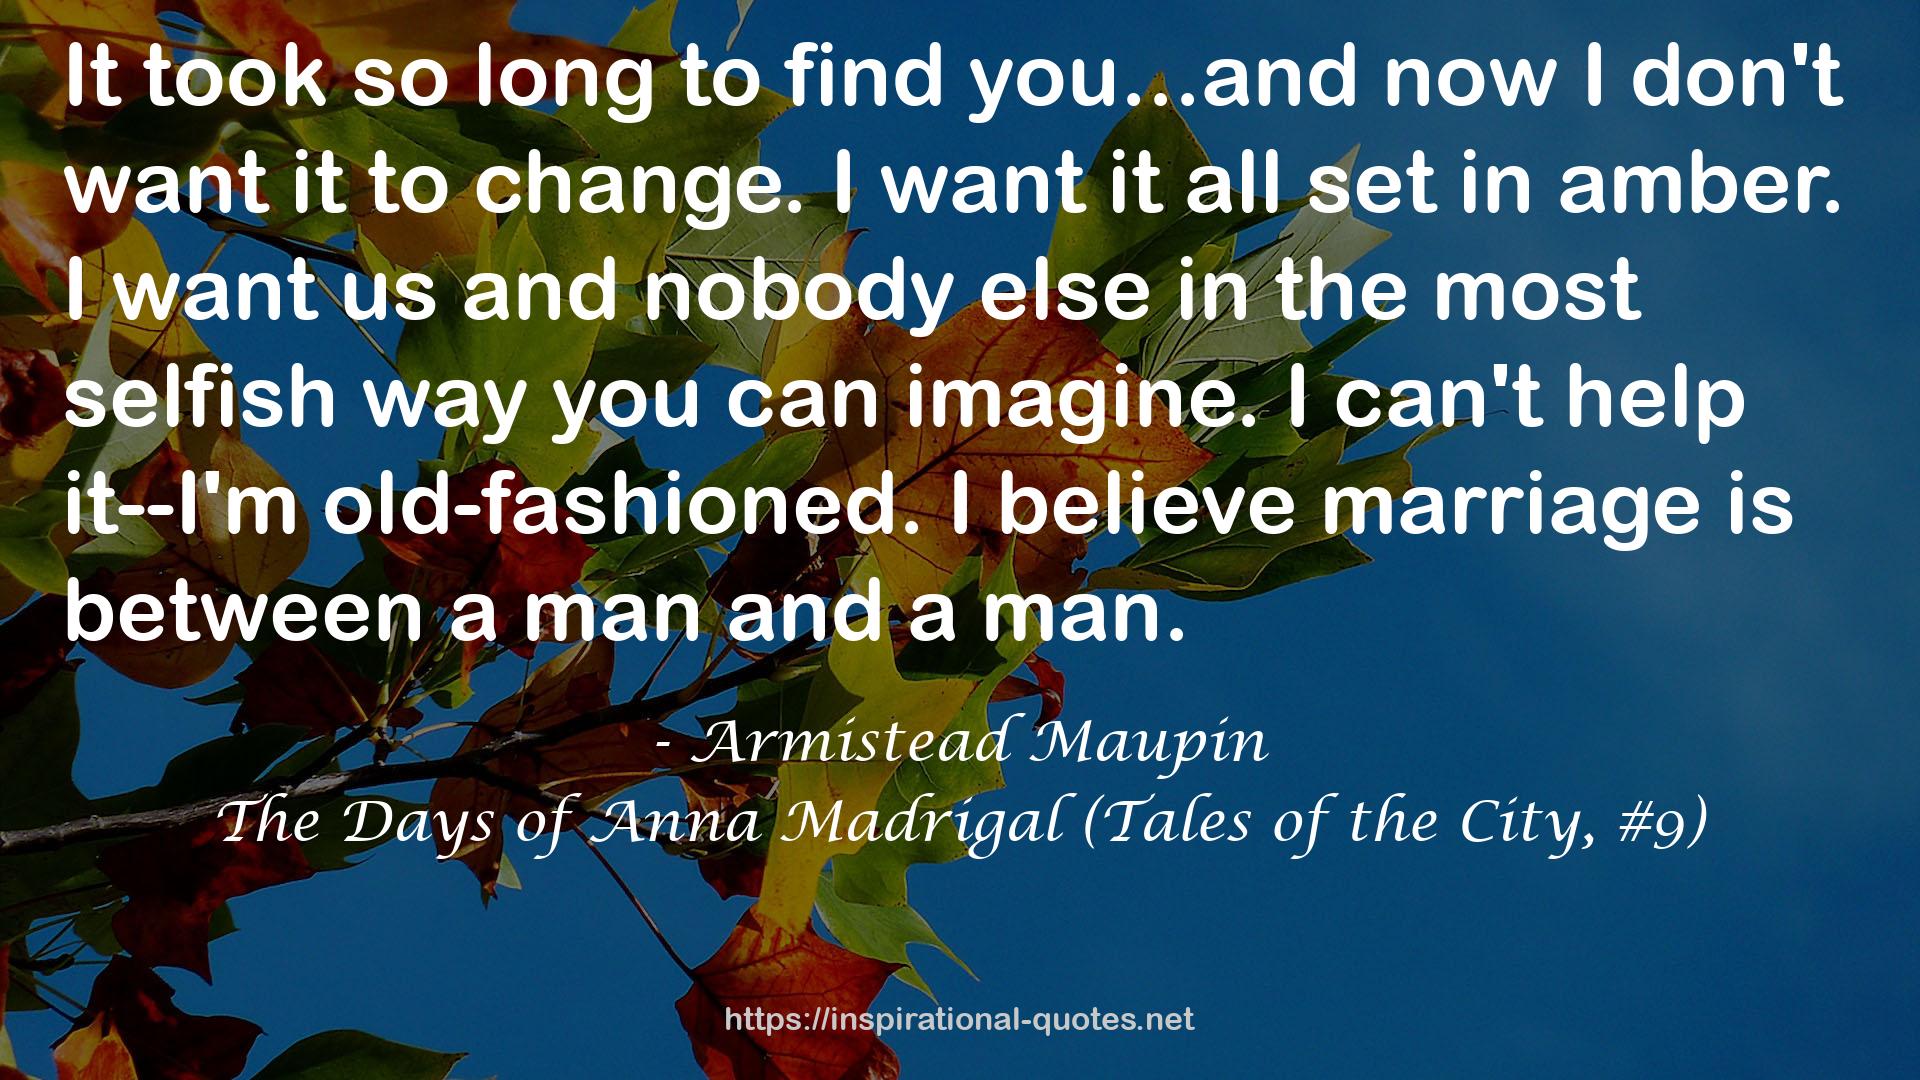 The Days of Anna Madrigal (Tales of the City, #9) QUOTES